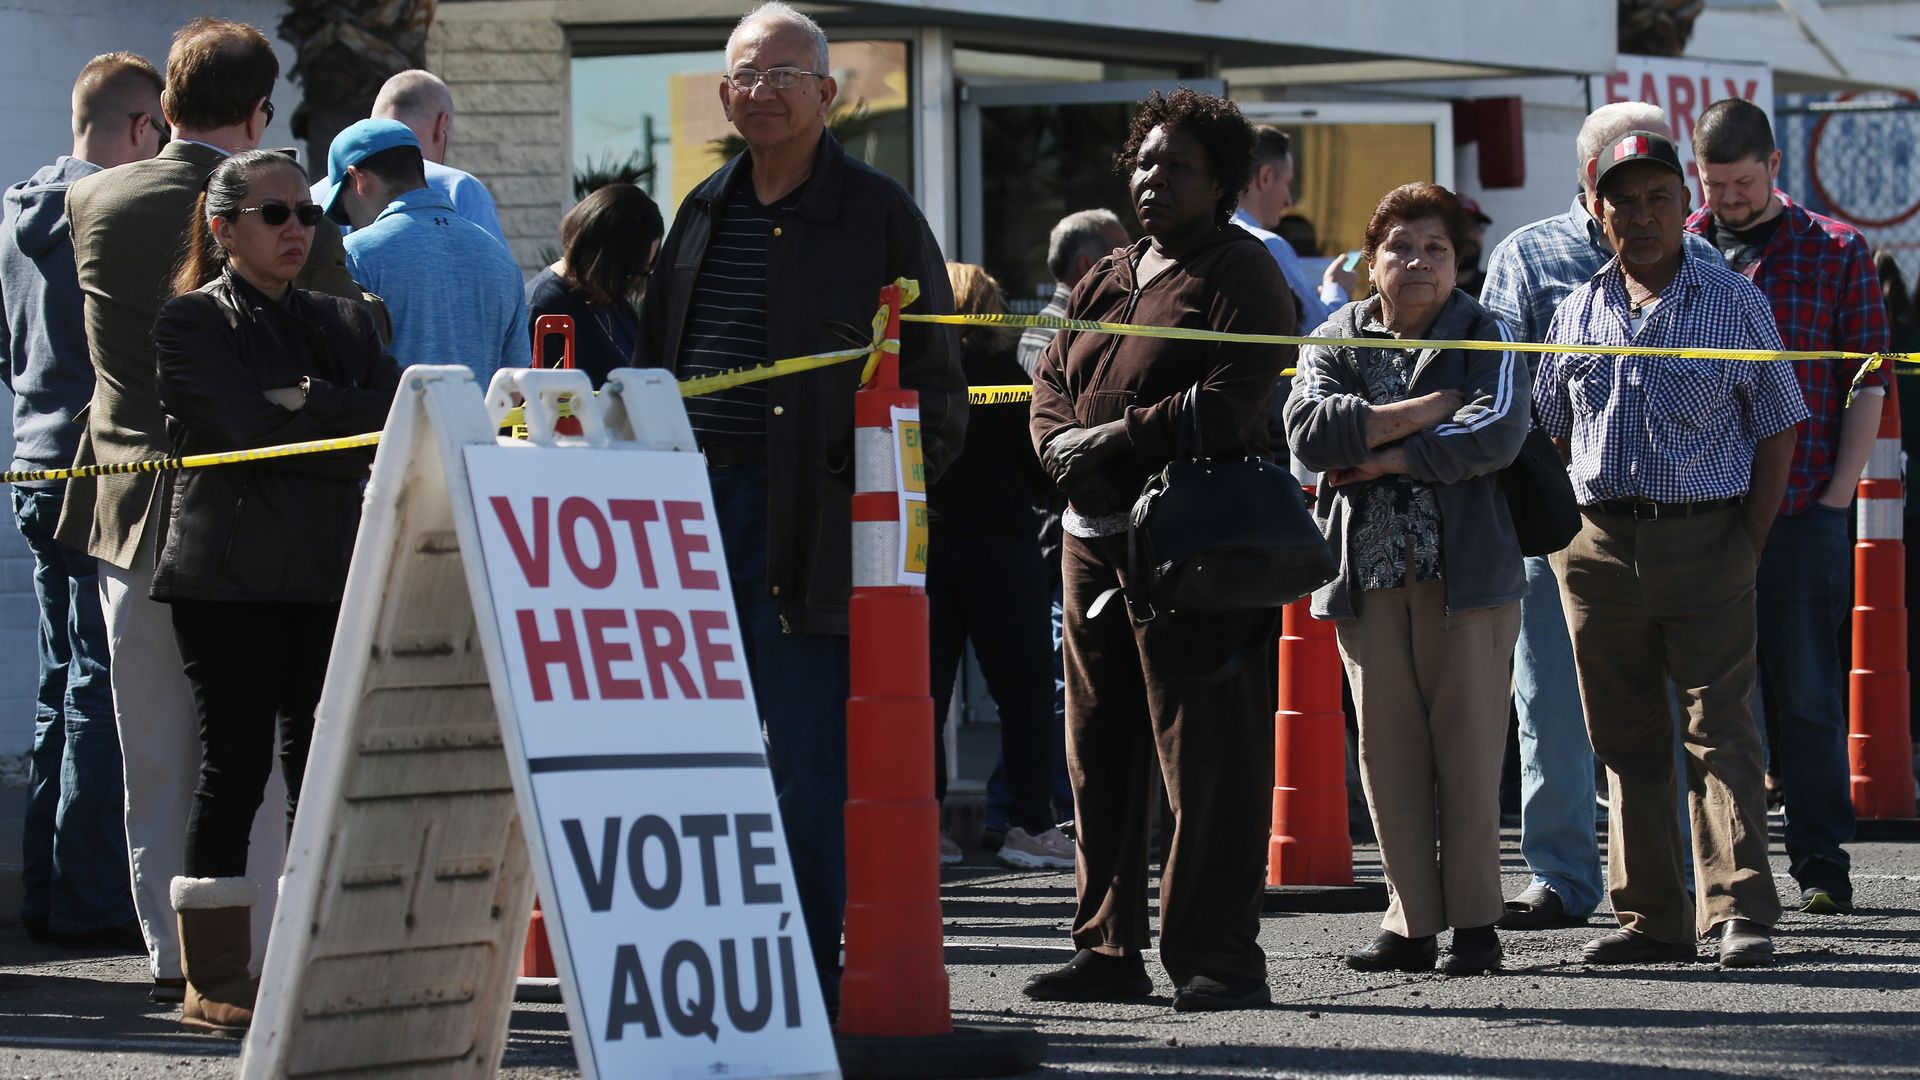 In this image, a line of people wait outside near a sign that reads "vote here" and vote aqui" 